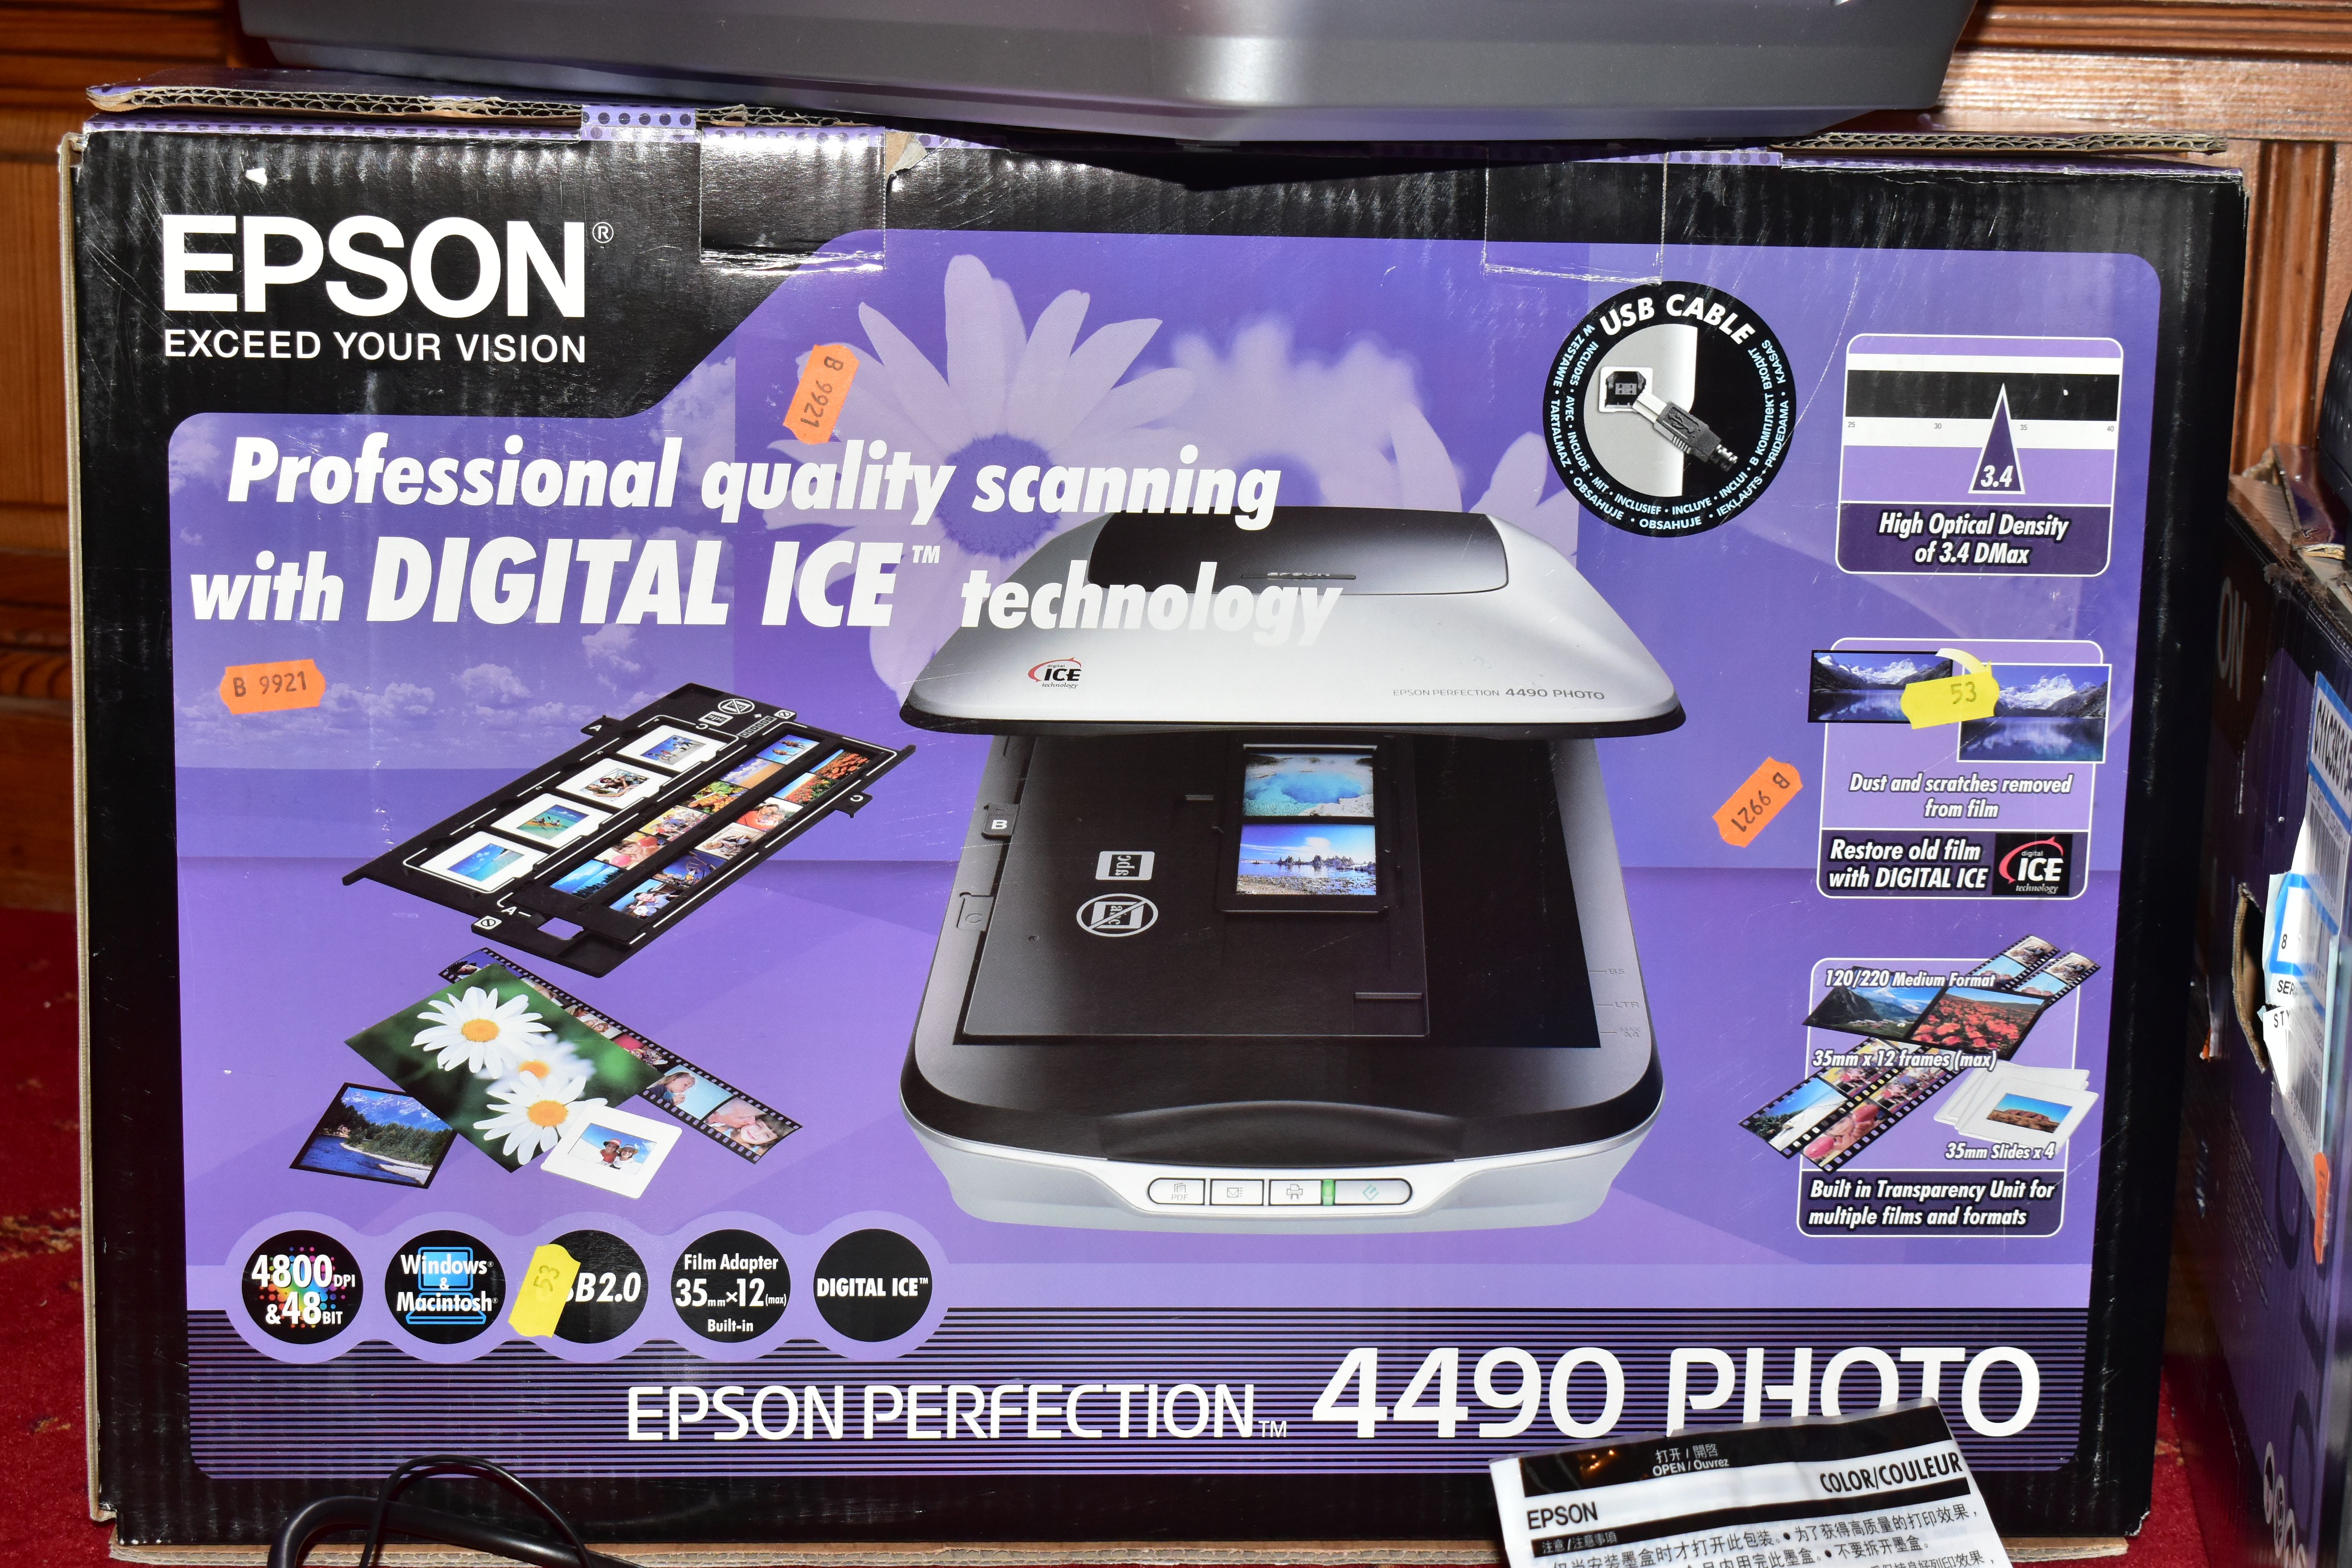 AN EPSON STYLUS PHOTO 1290 PROFESSIONAL A3 PRINTER in box with spare cartridges, manual, disc and an - Image 5 of 6